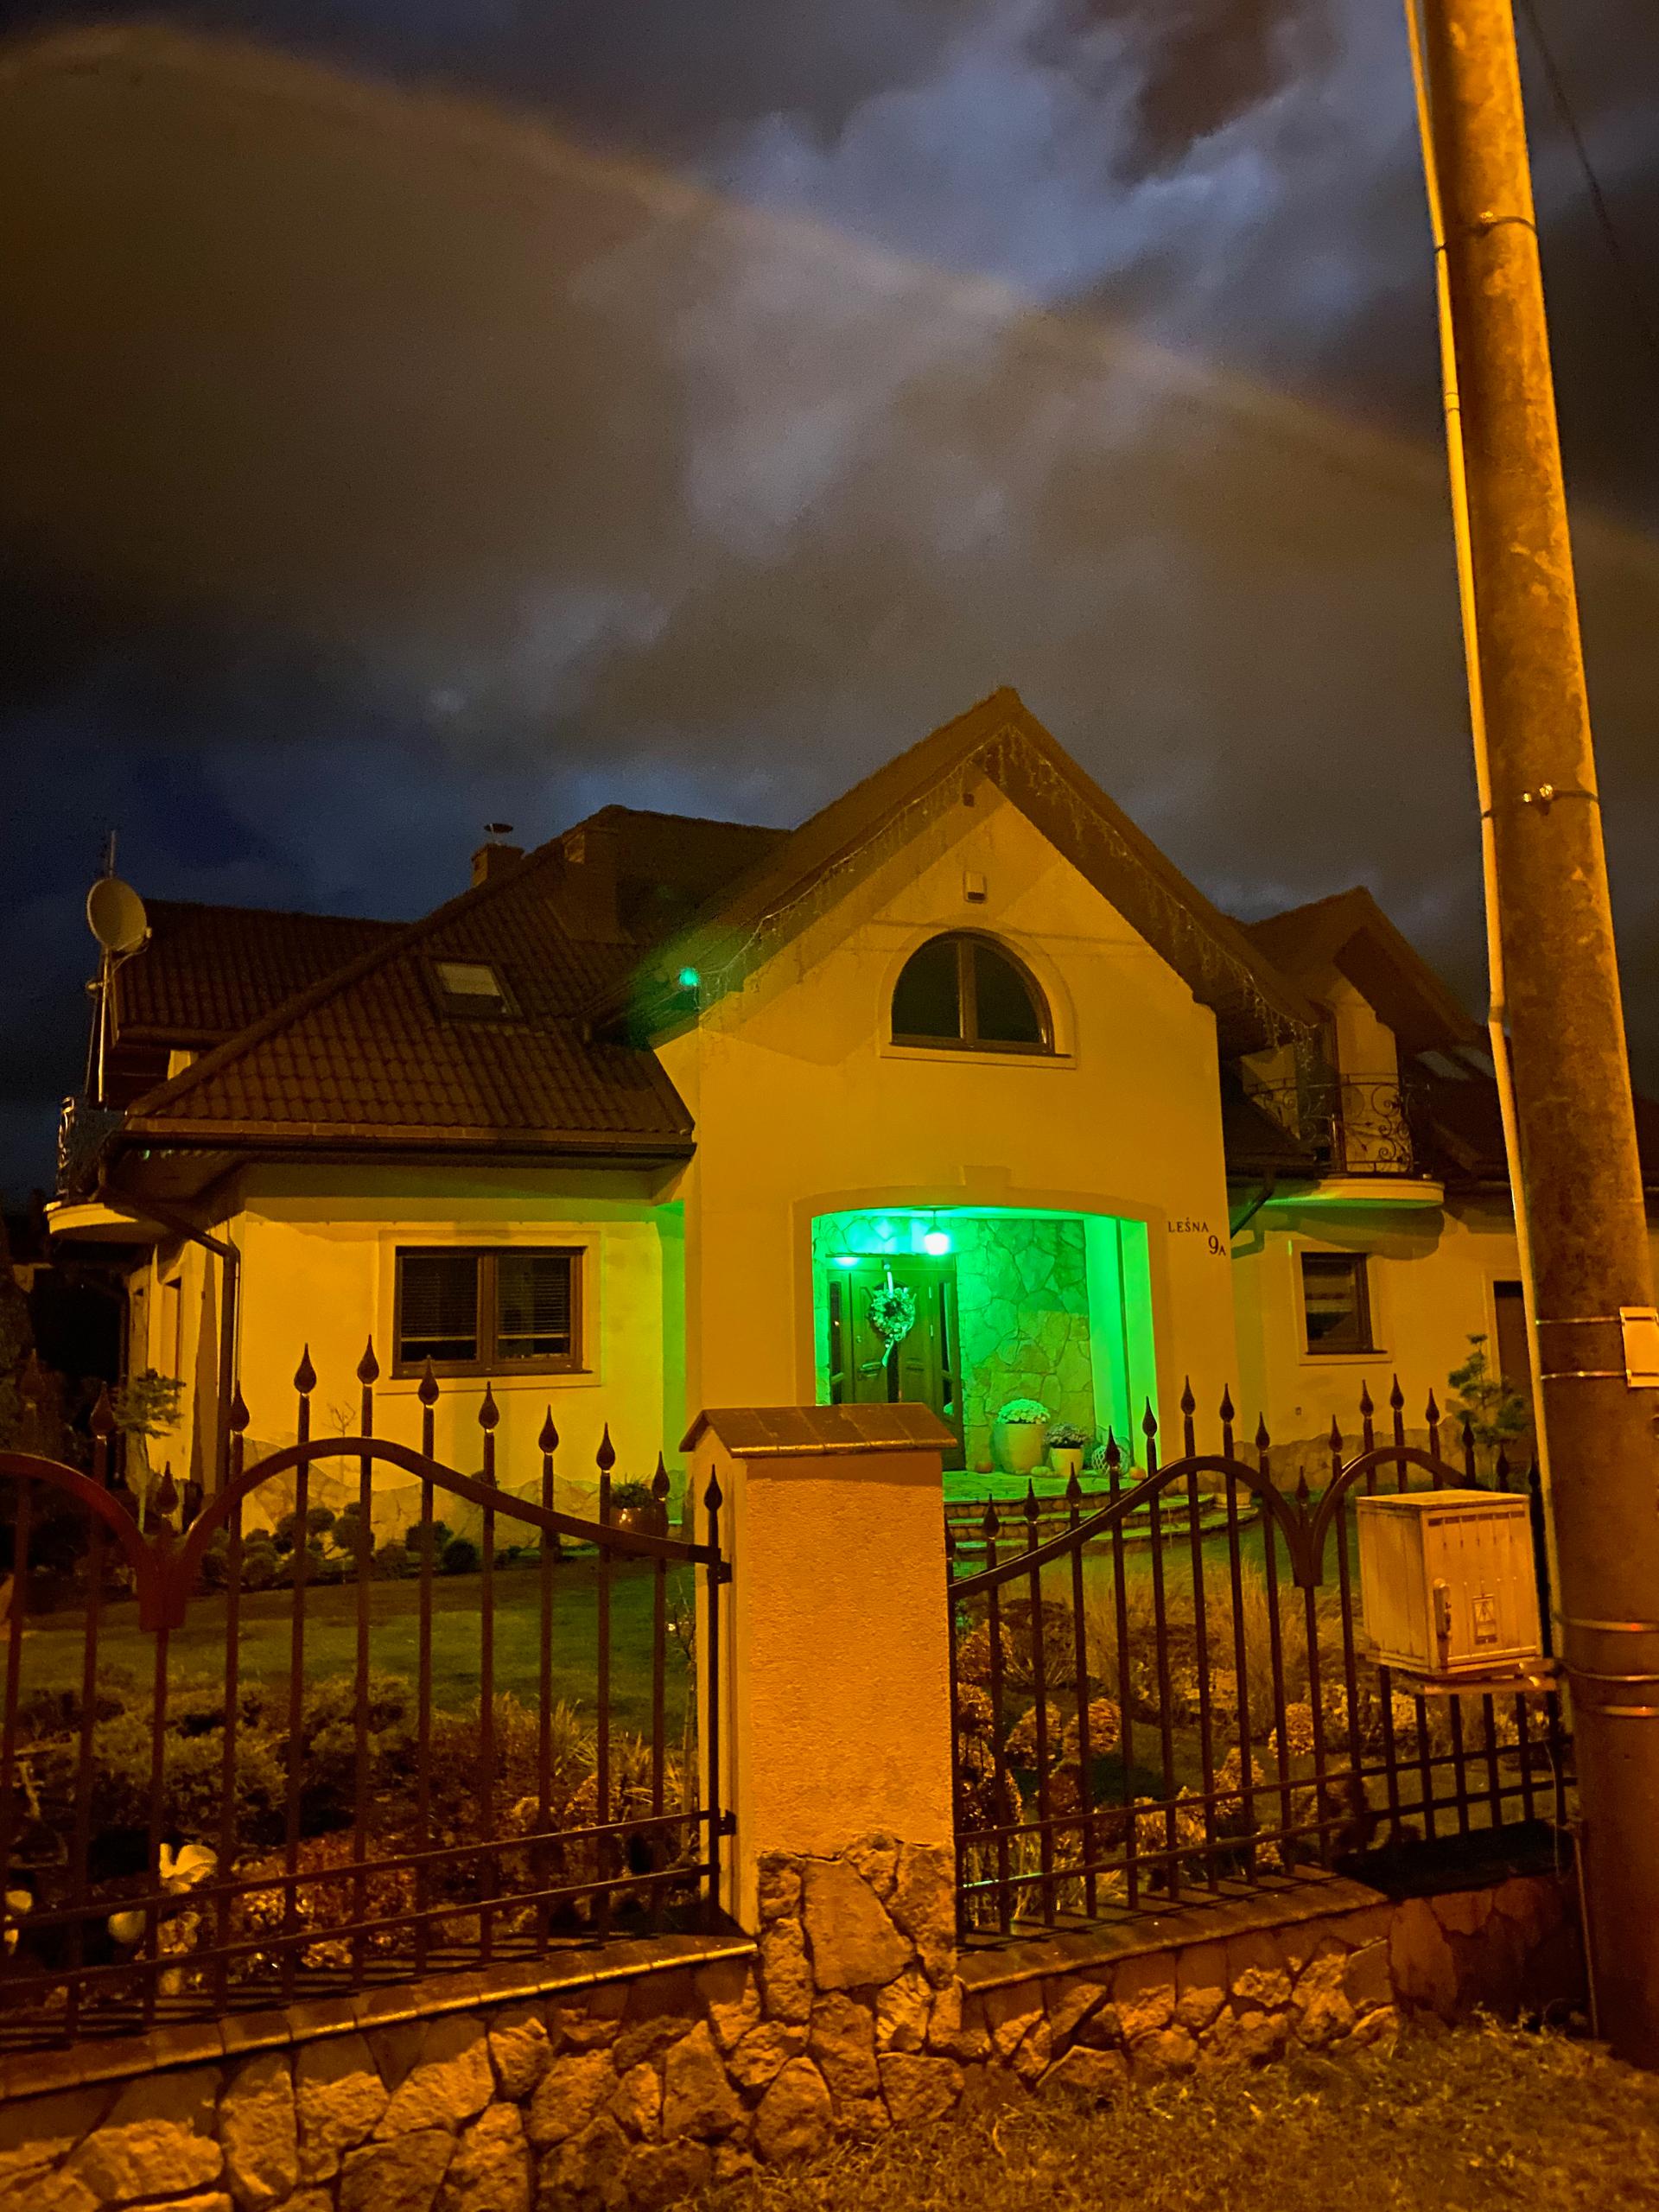 Locals near the Belarusian border have lit green lanterns in their homes to signal to migrants that it is a safe place to seek help